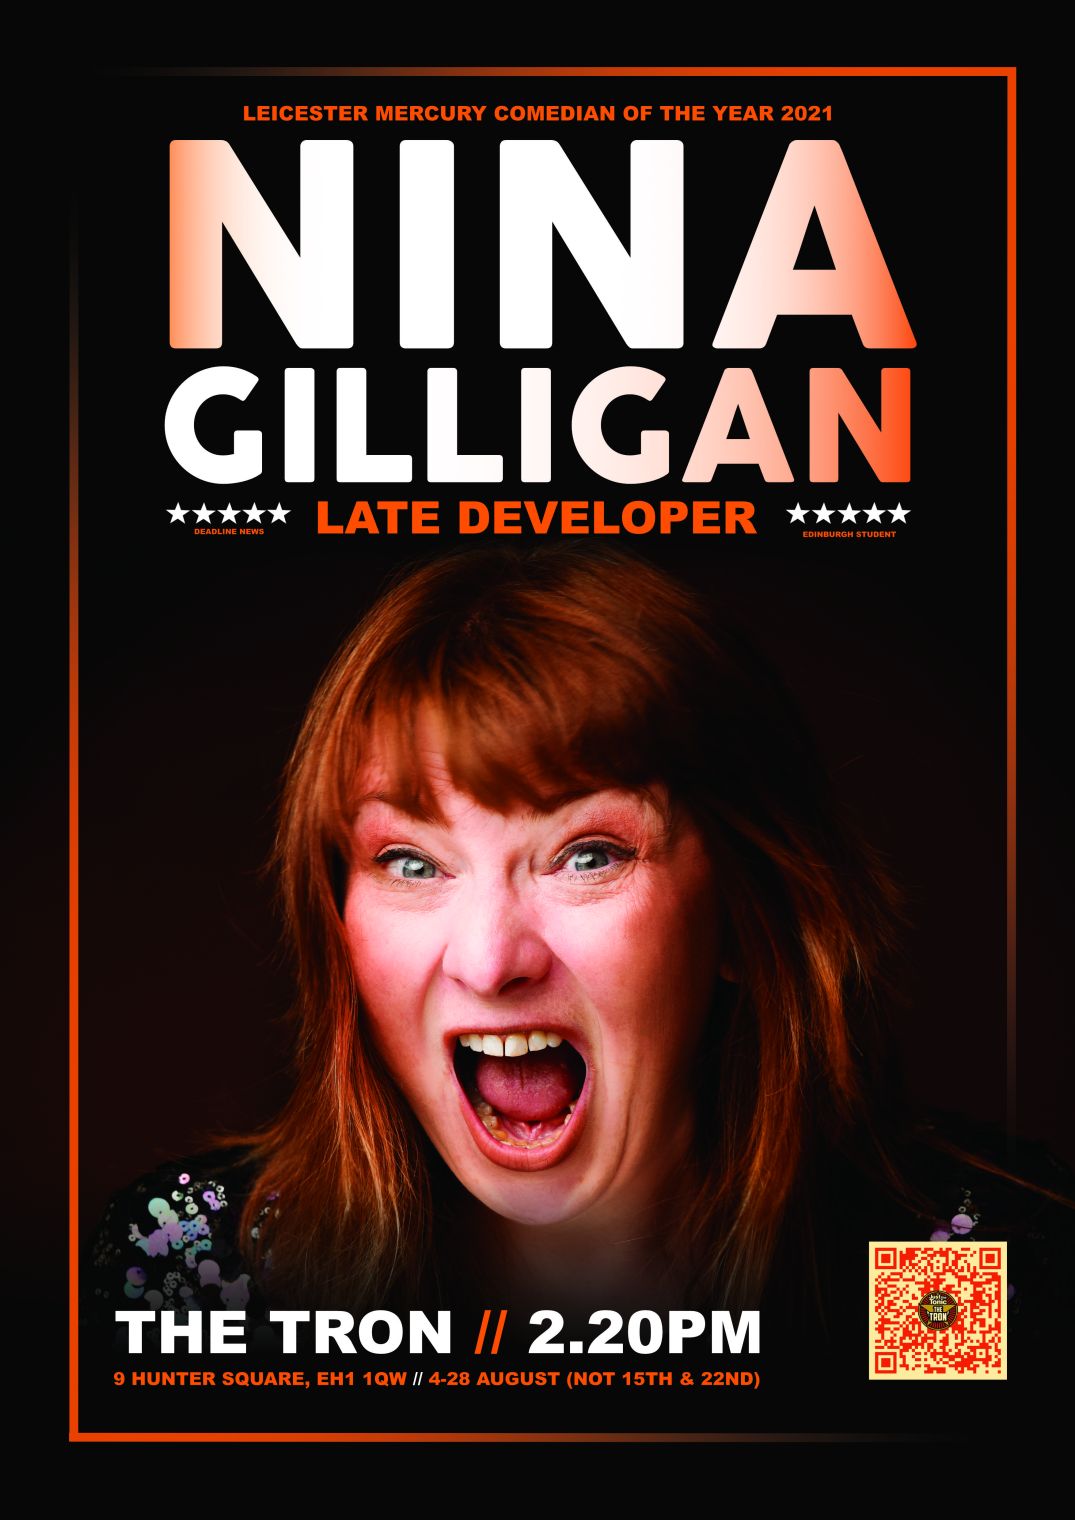 Nina Gilligan will be performing her new show 'Late Developer' at the Edinburgh Fringe Festival this summer